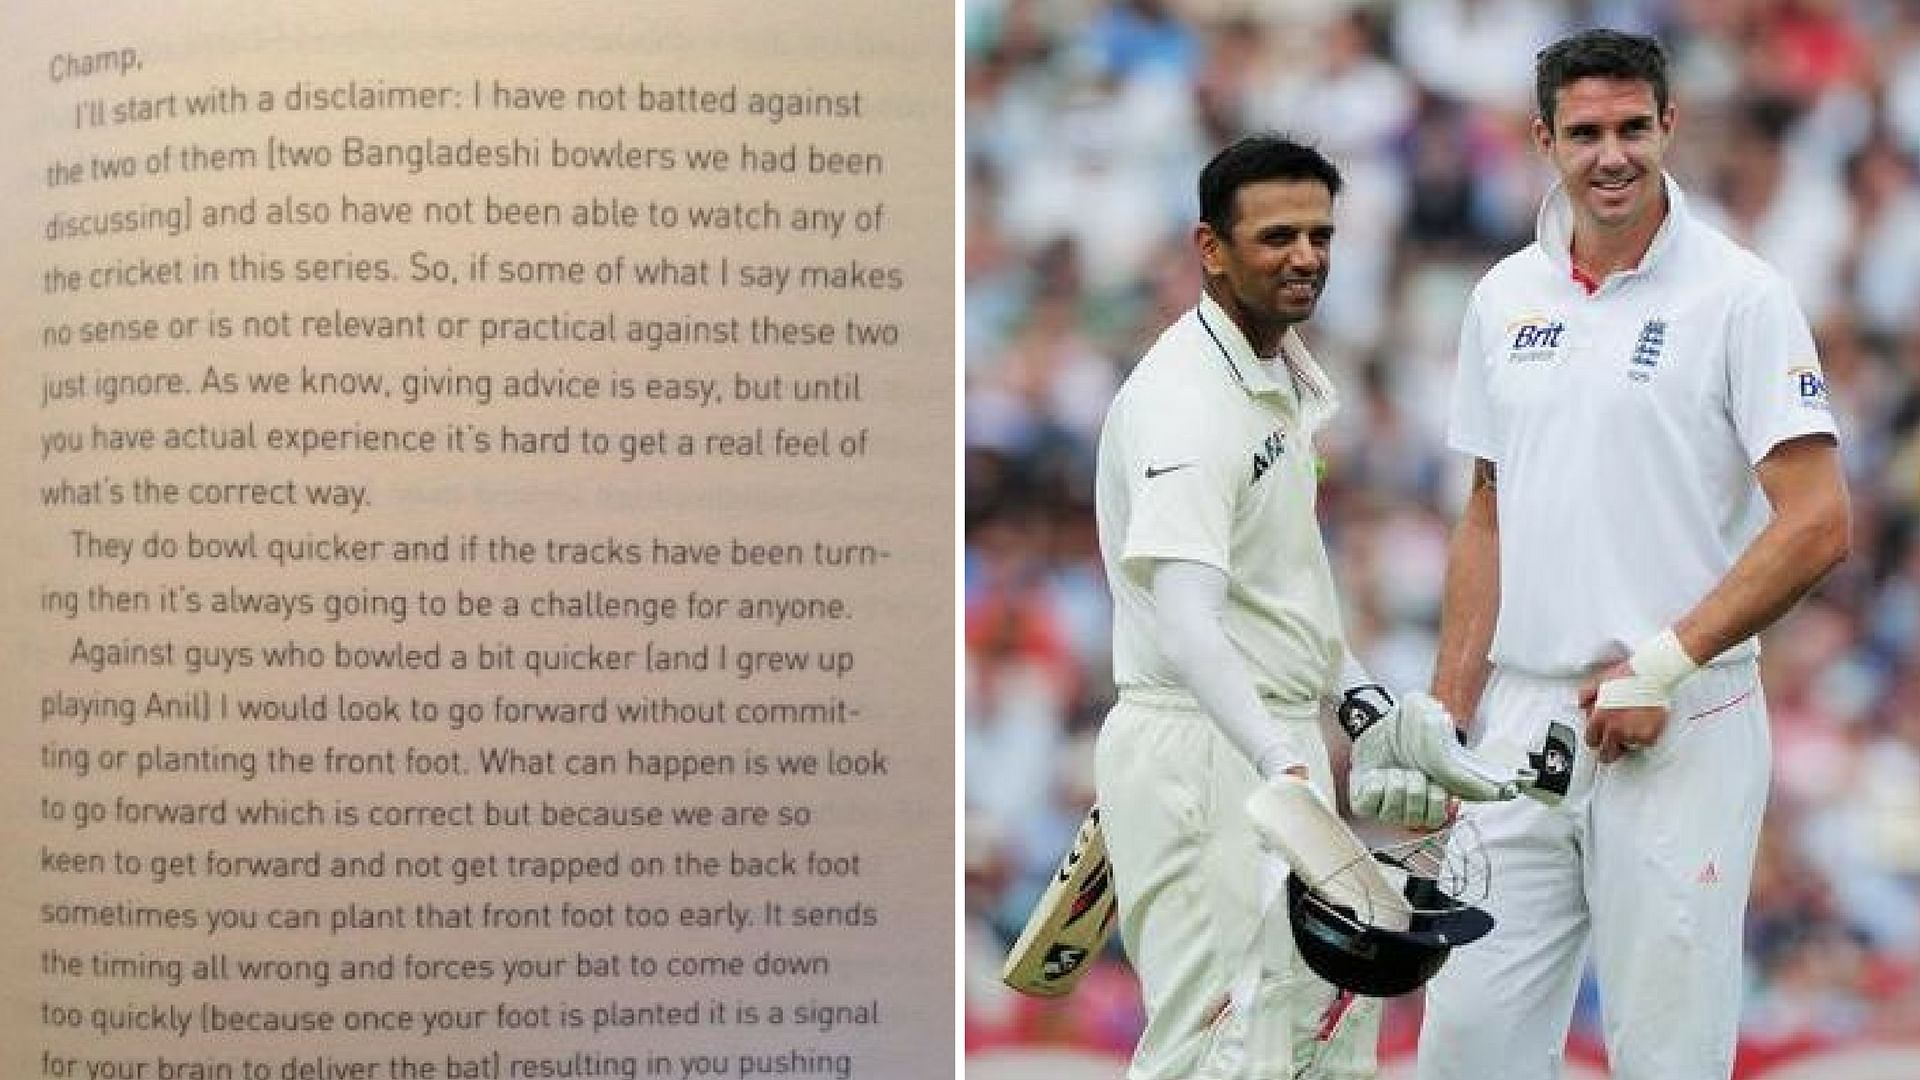 Rahul Dravid wrote Kevin Pietersen a letter. (Photo Courtesy: Twitter/<a href="https://twitter.com/fwildecricket/status/524895540191182848">fwildecricket</a>/<a href="https://twitter.com/BrokenCricket/status/430780906261868544">BrokenCricket</a>) 